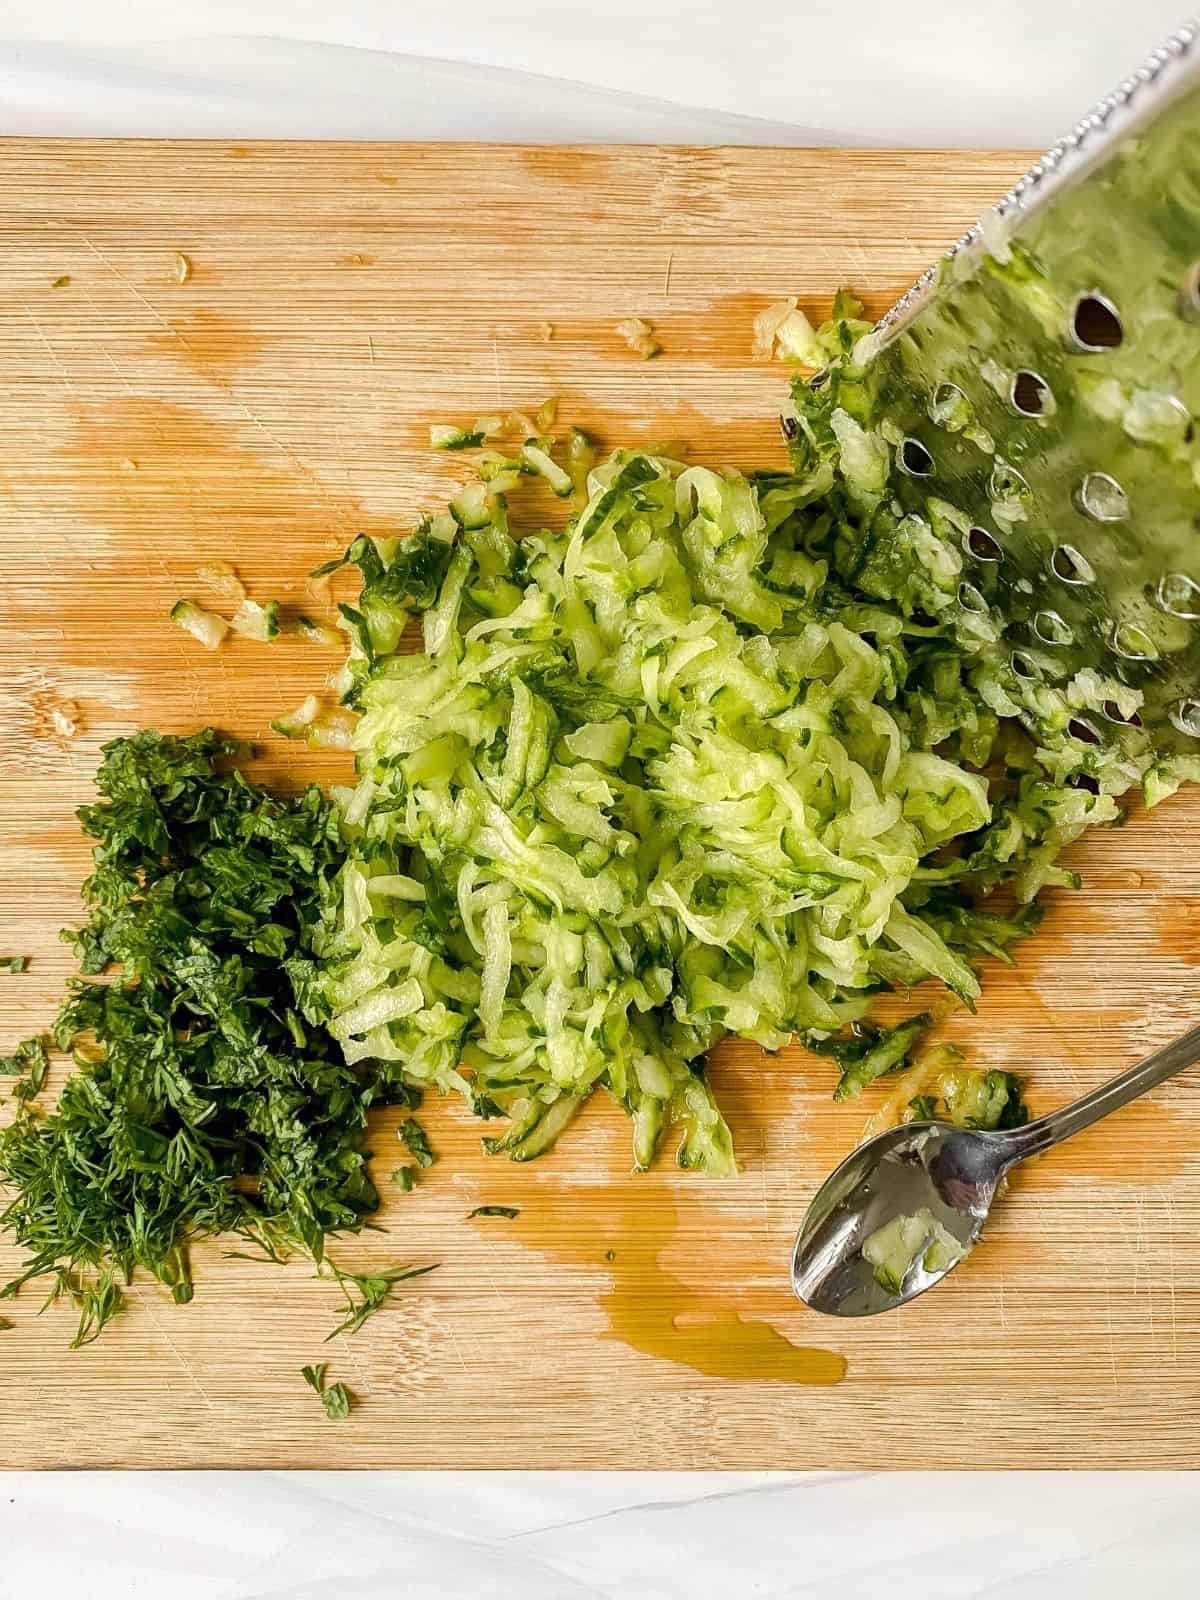 grated cucumber and diced mint and dill on a wooden chopping board.